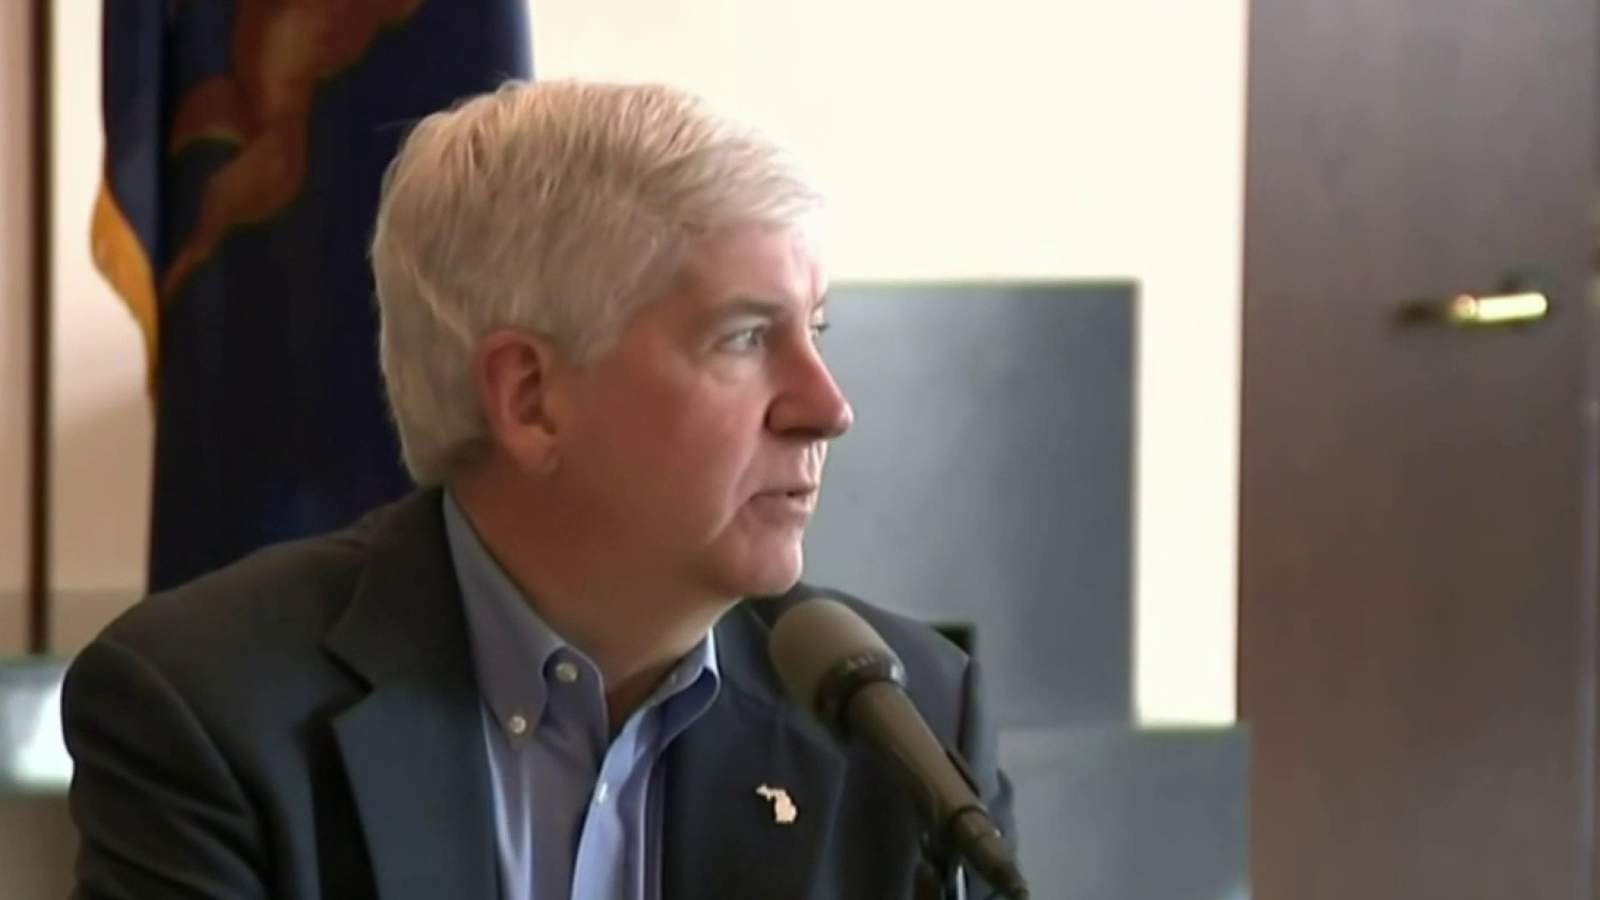 Flint water crisis: Ex-Michigan governor Rick Snyder due back in court today